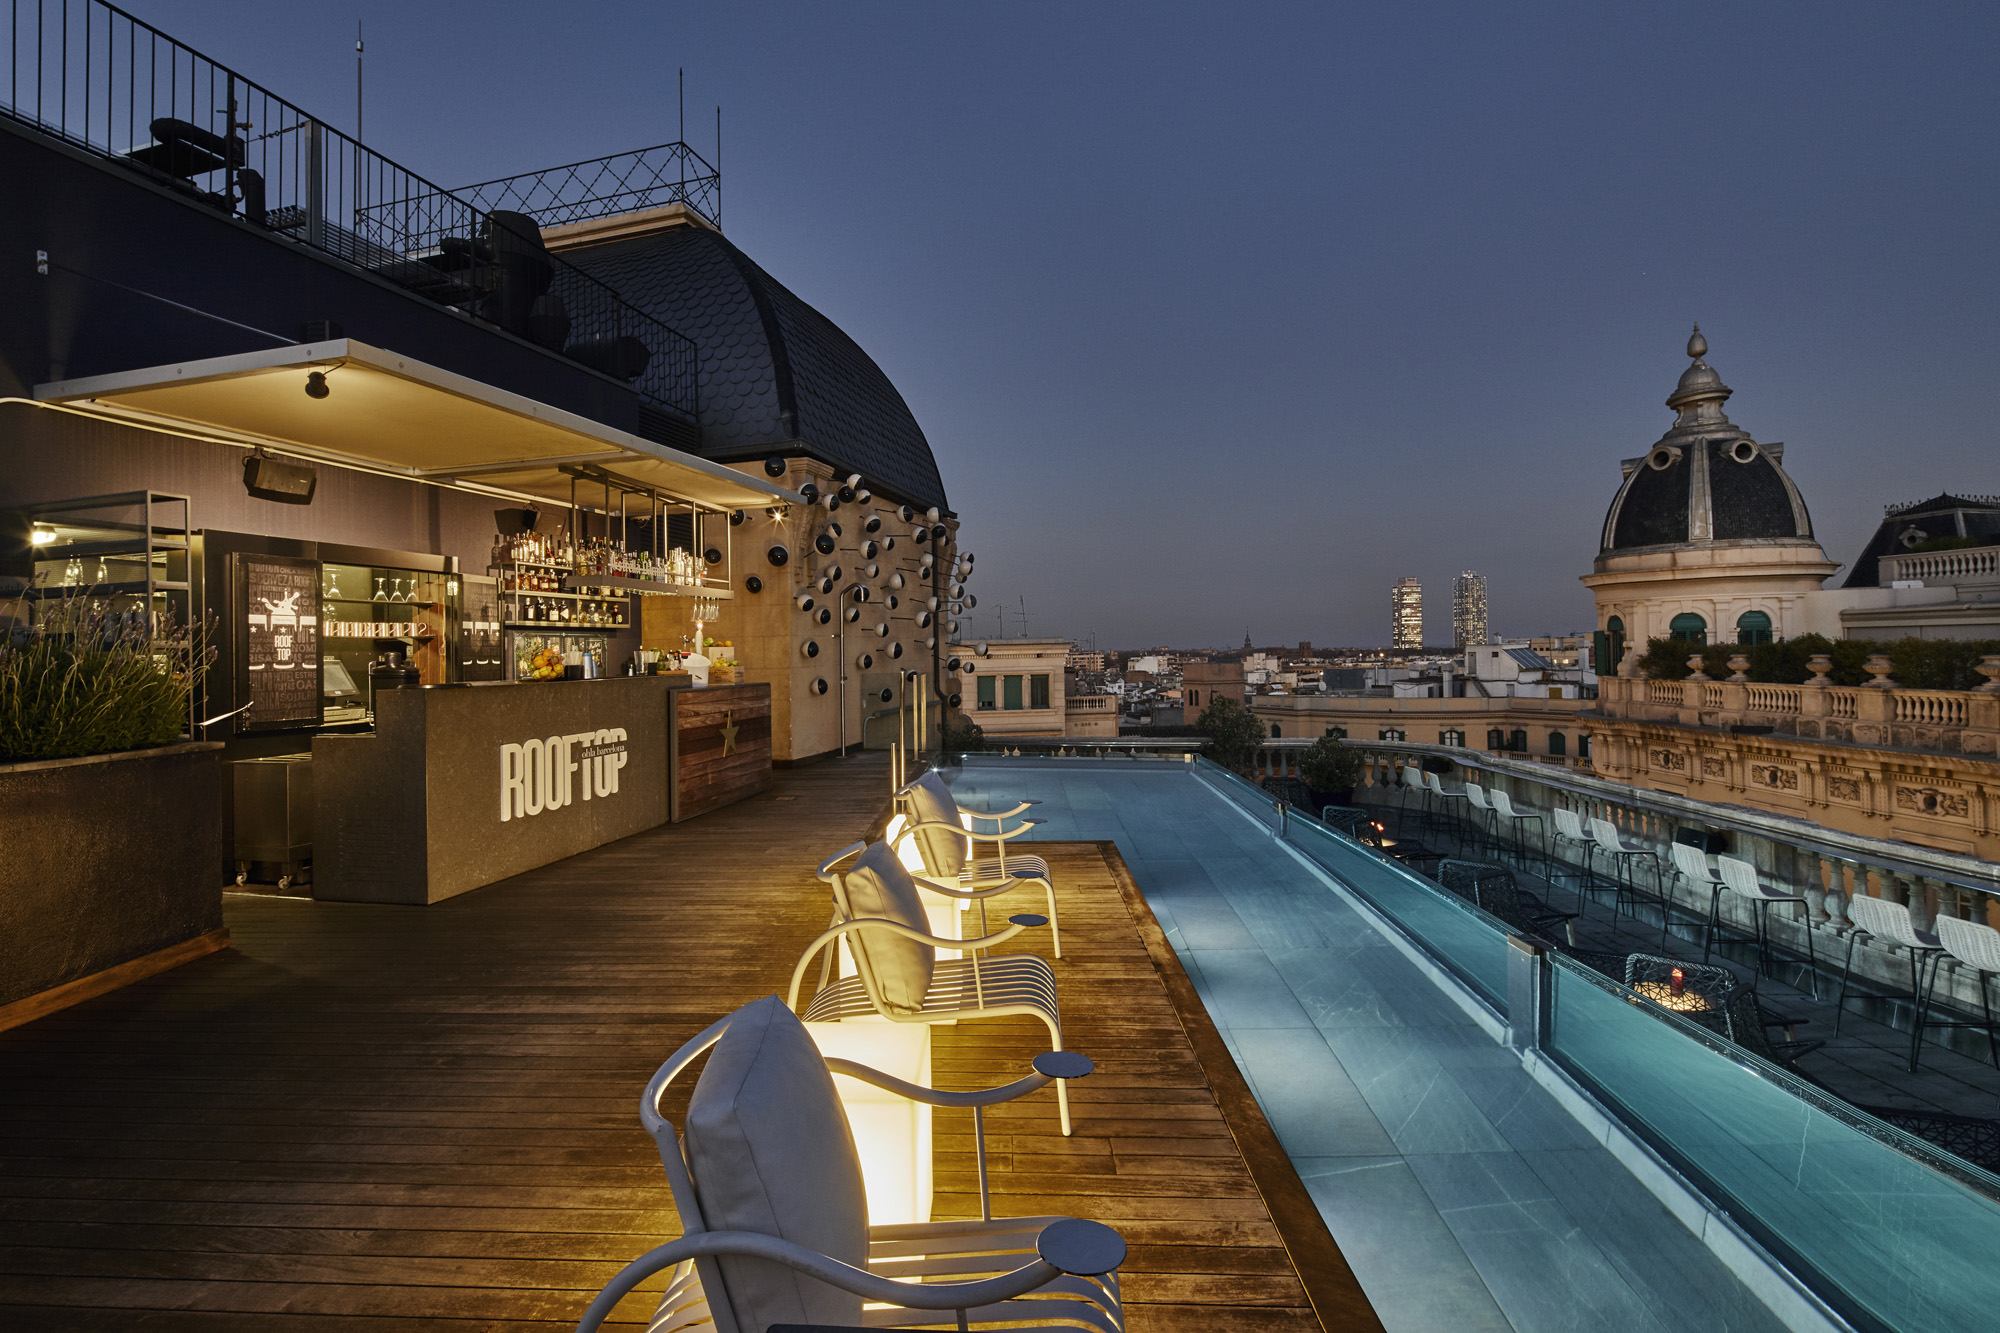 Rooftop Terrace at night